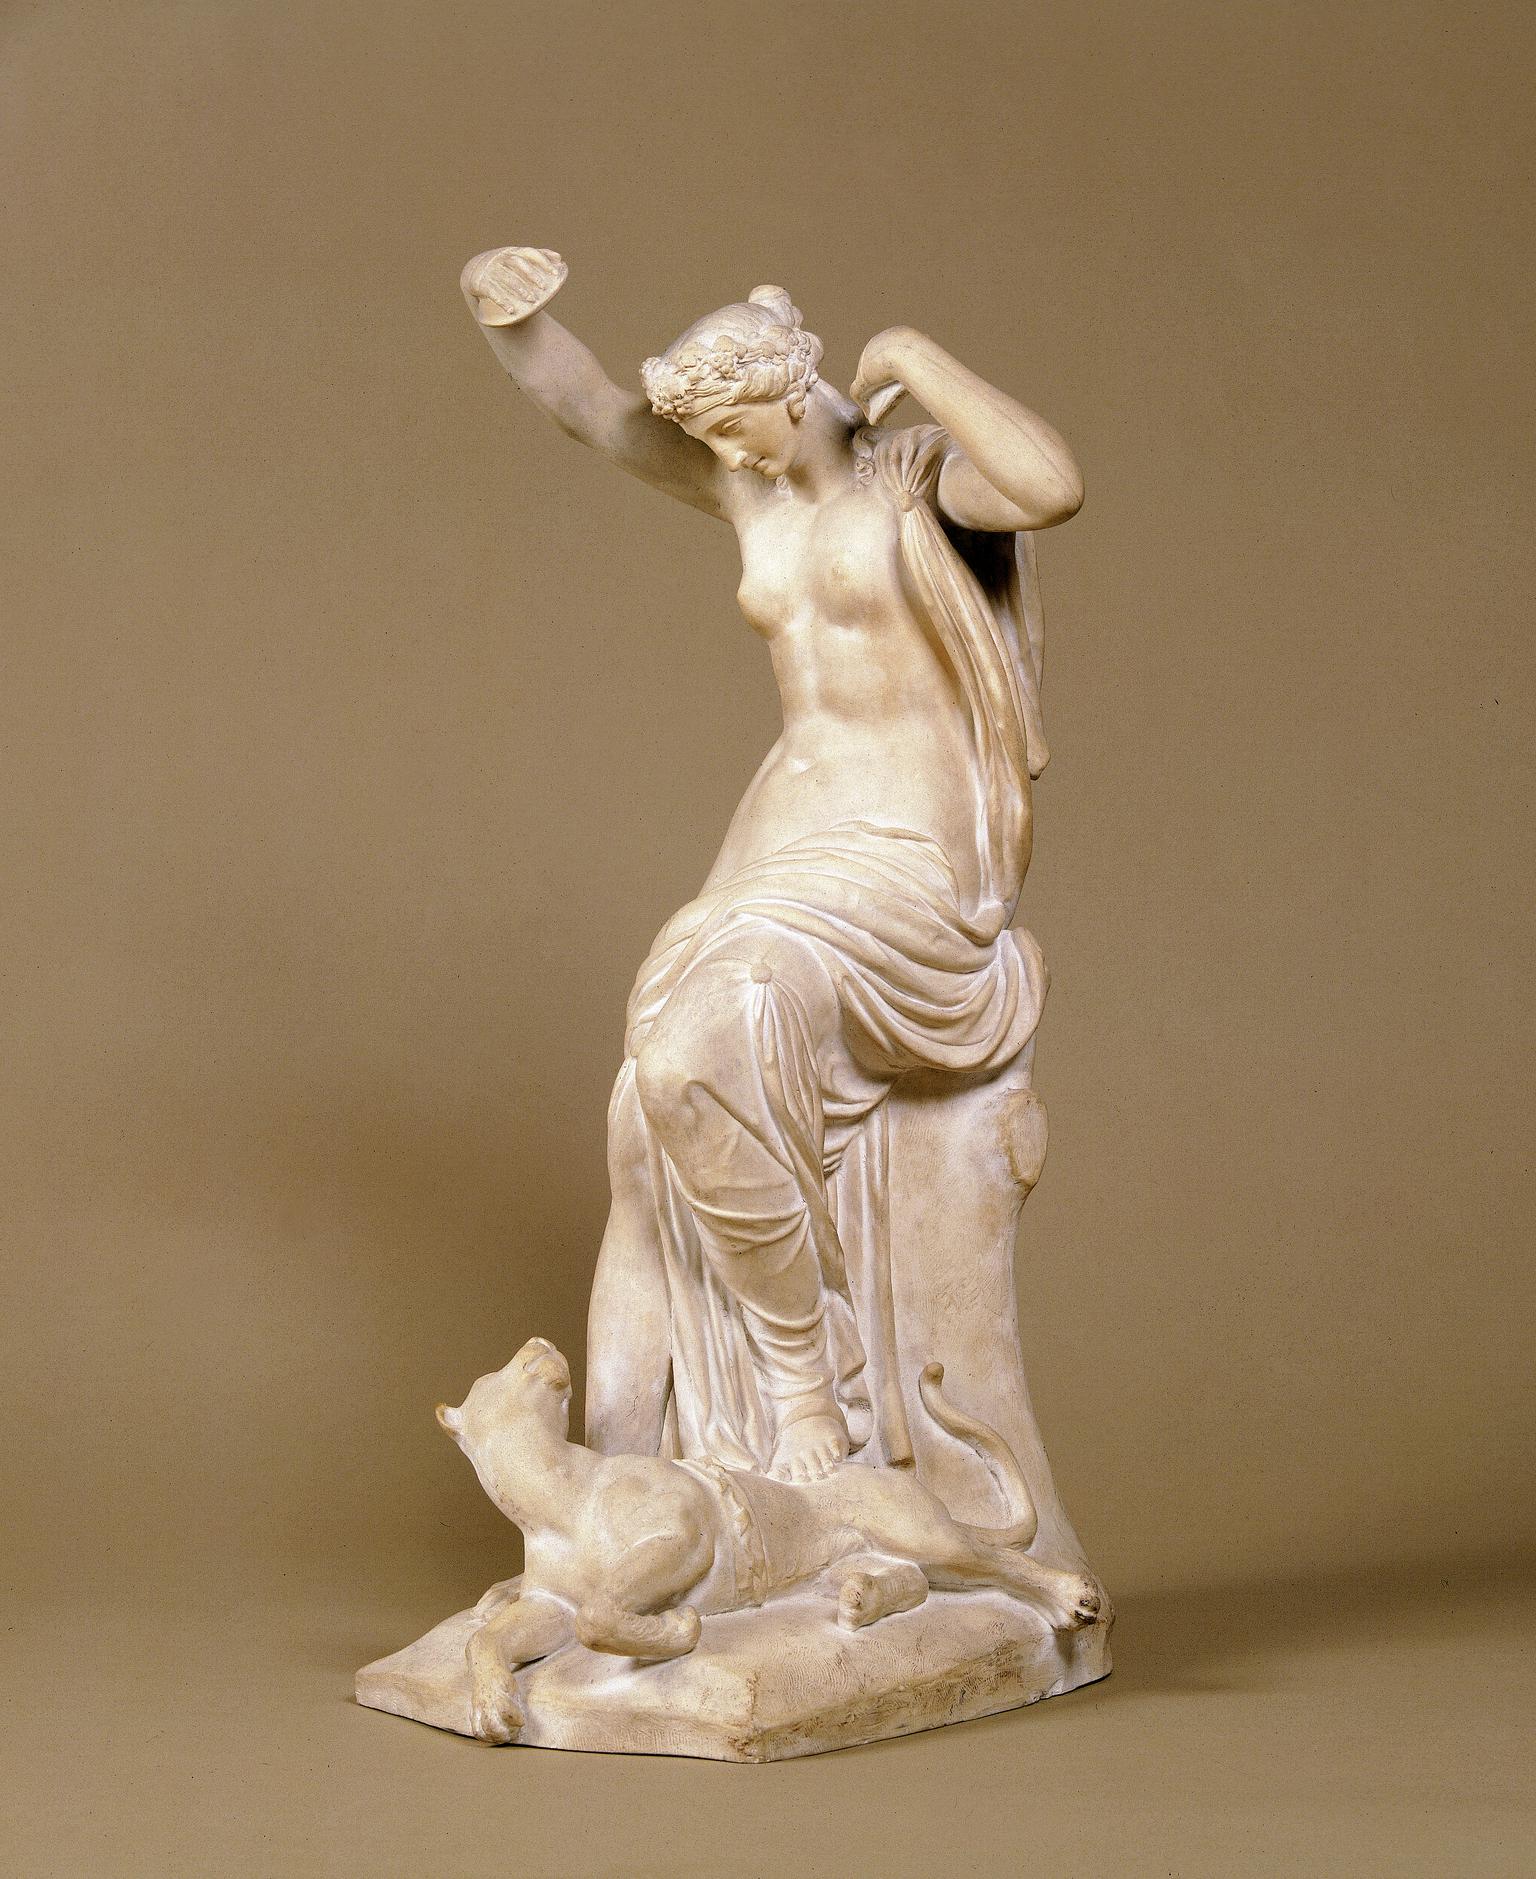 A Bacchante Diverting the Attention of a Tiger with her Cymbals